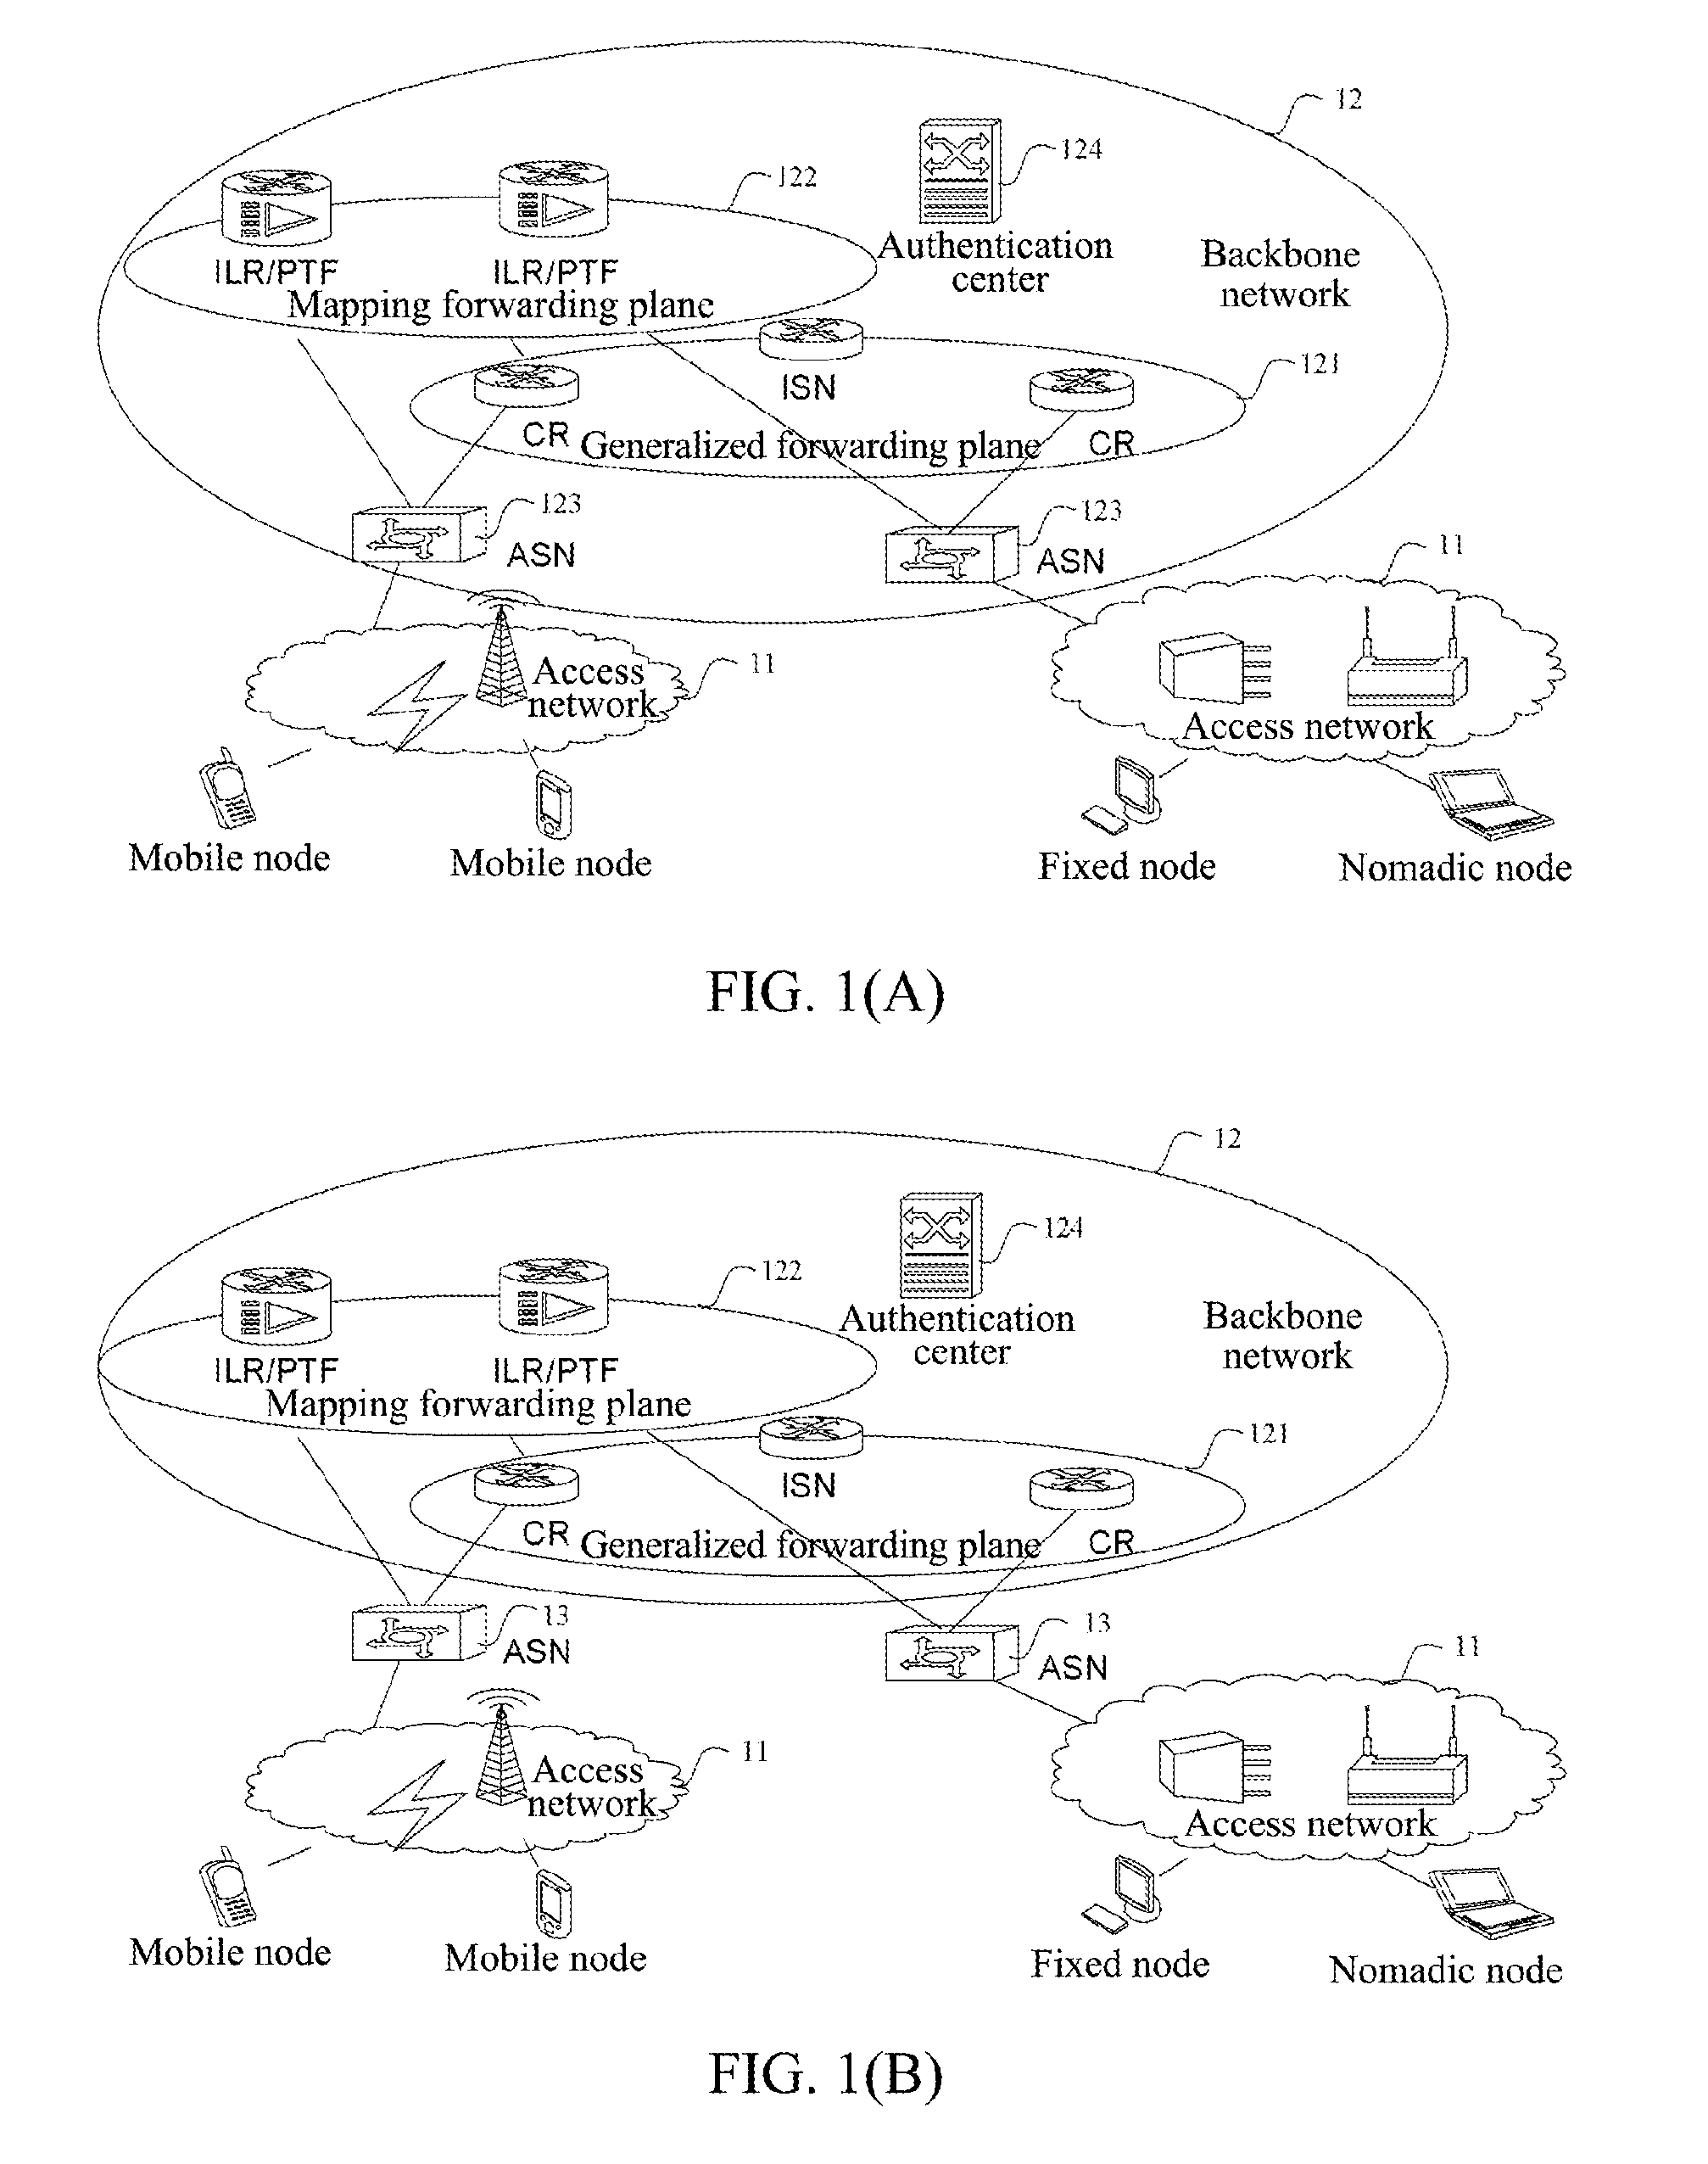 Network based on identity identifier and location separation architecture backbone network, and network element thereof